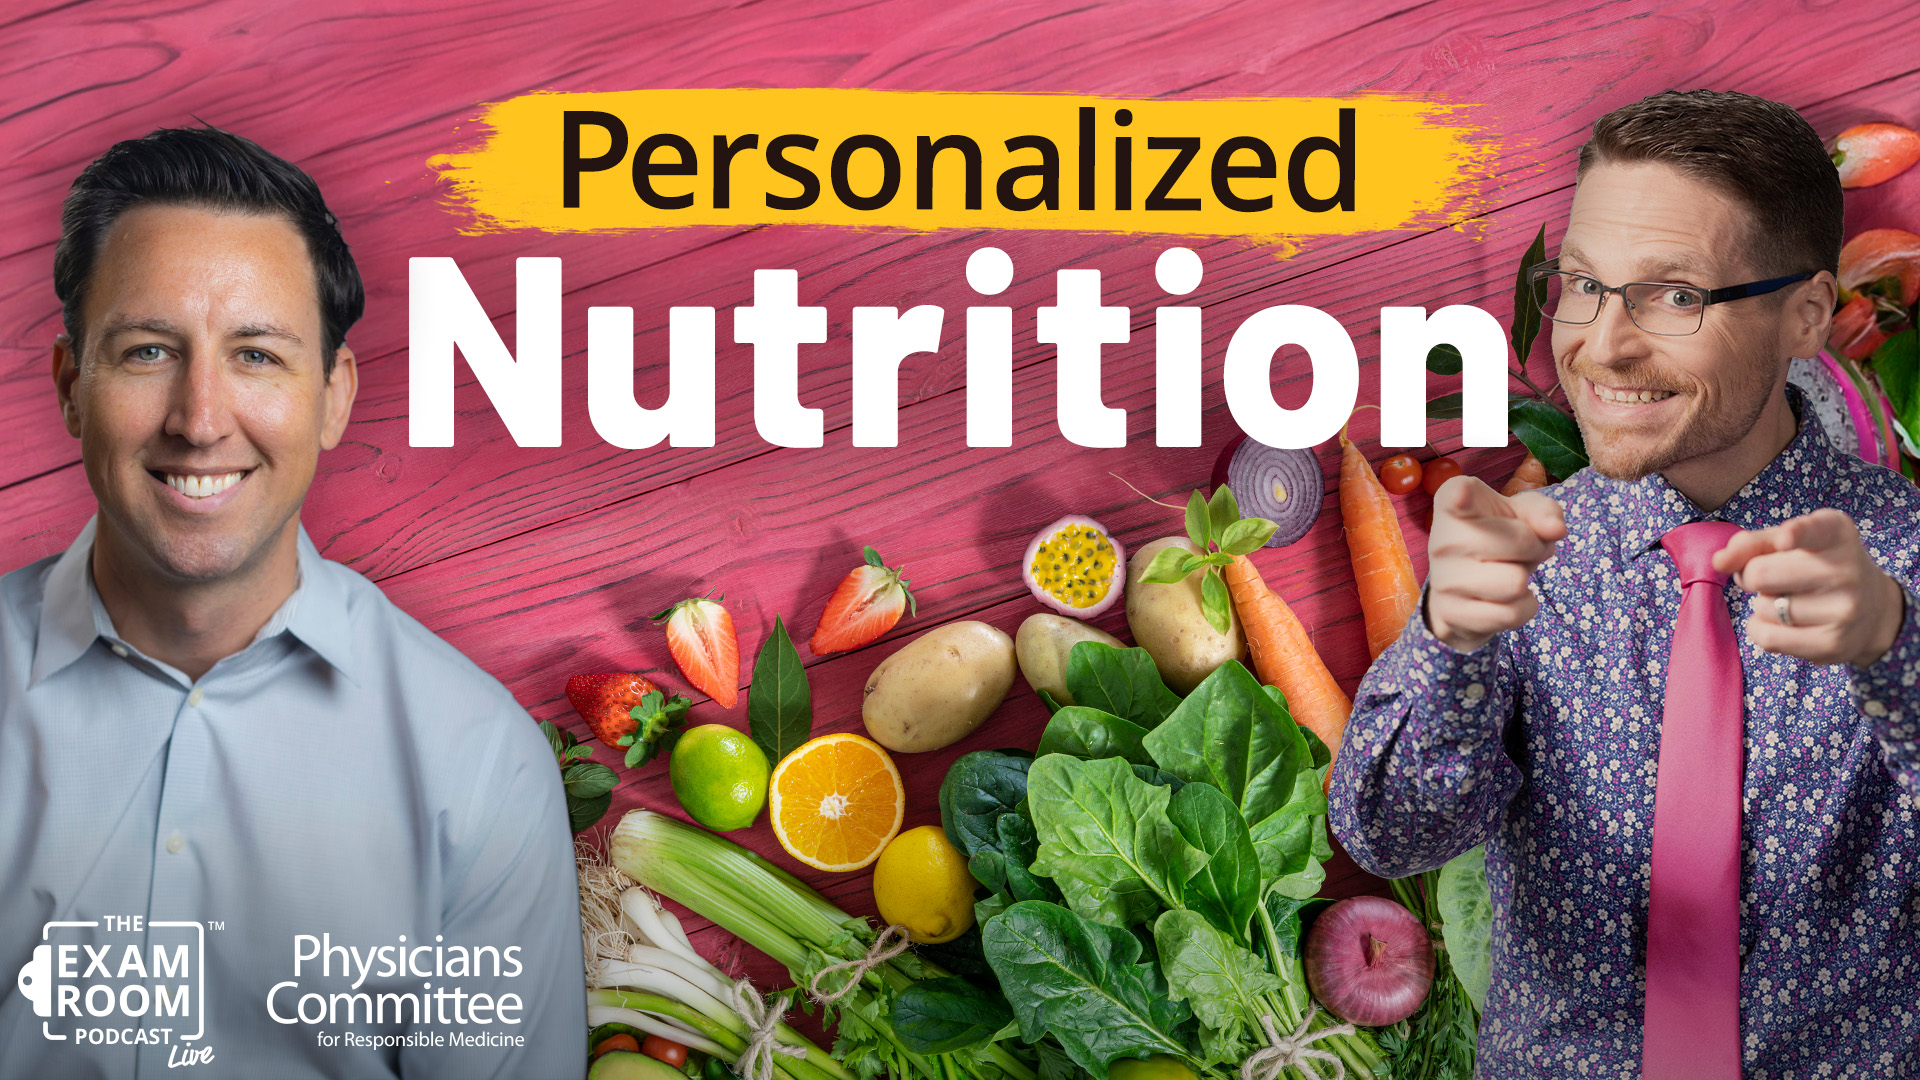 Personalized Nutrition: Your Own Diet For Optimal Health| Dr. Will Bulsiewicz